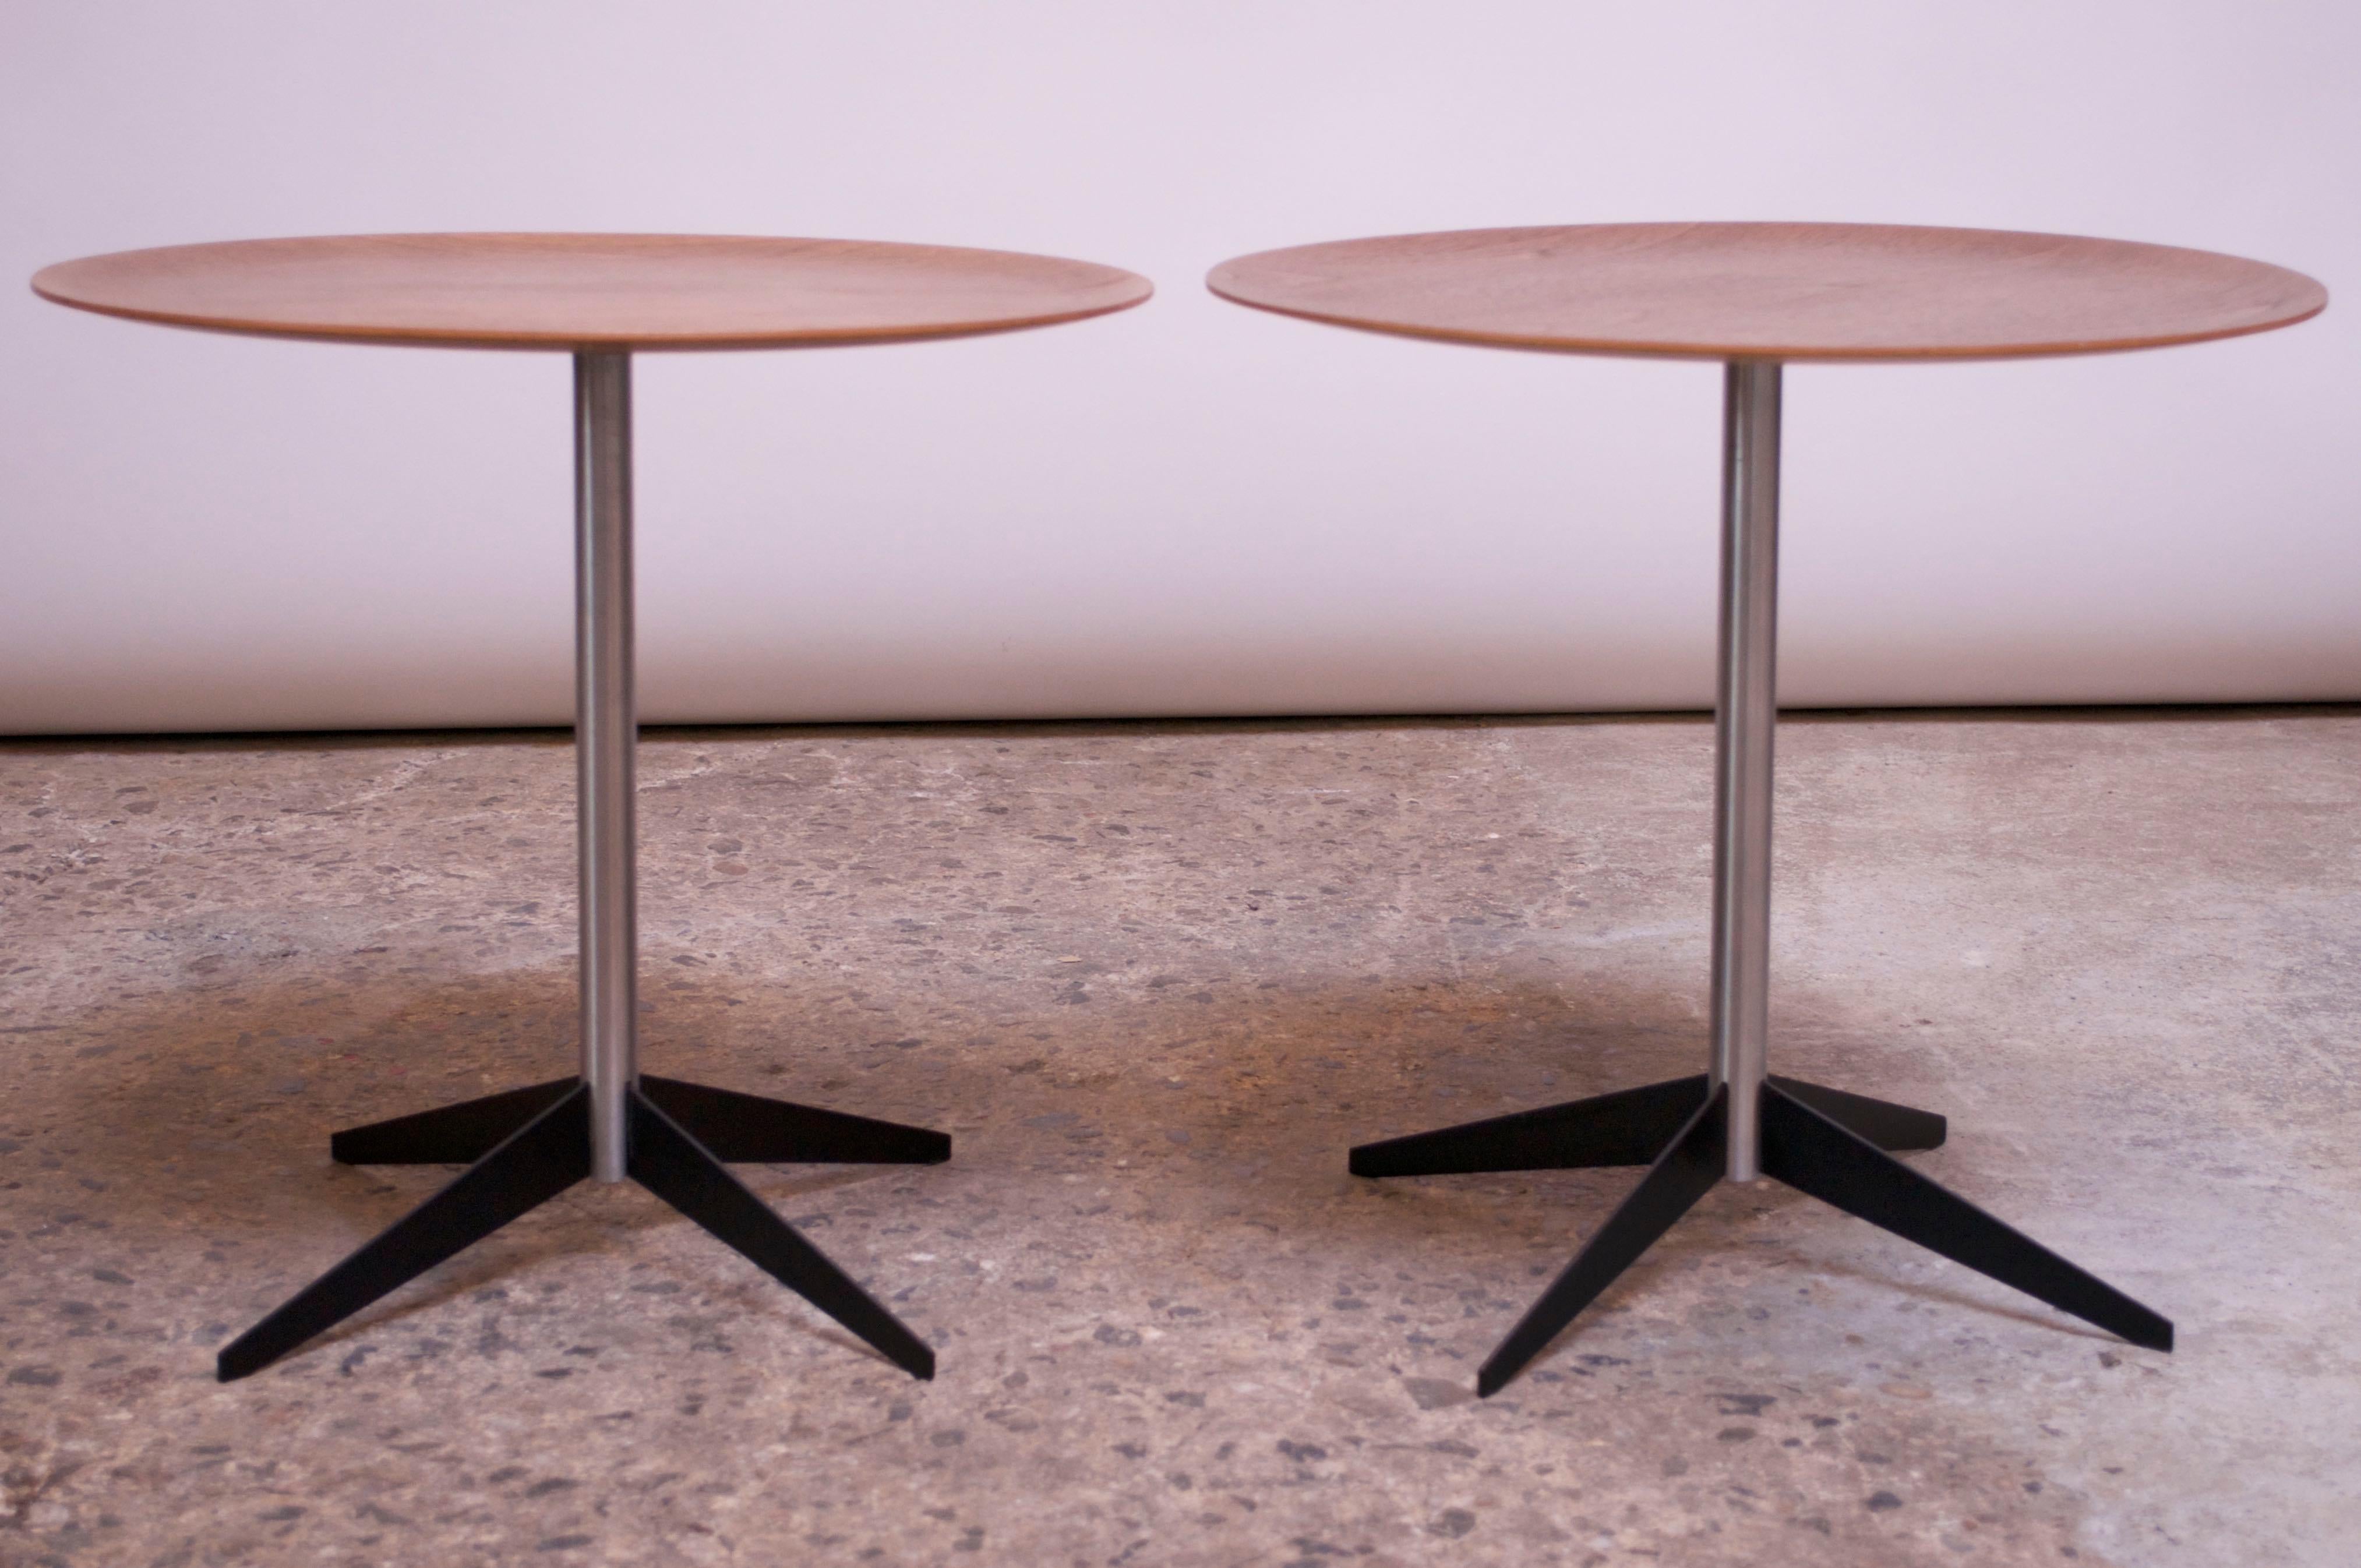 American Pair of Vintage Walnut and Steel Tray Tables By George Nelson for Herman Miller